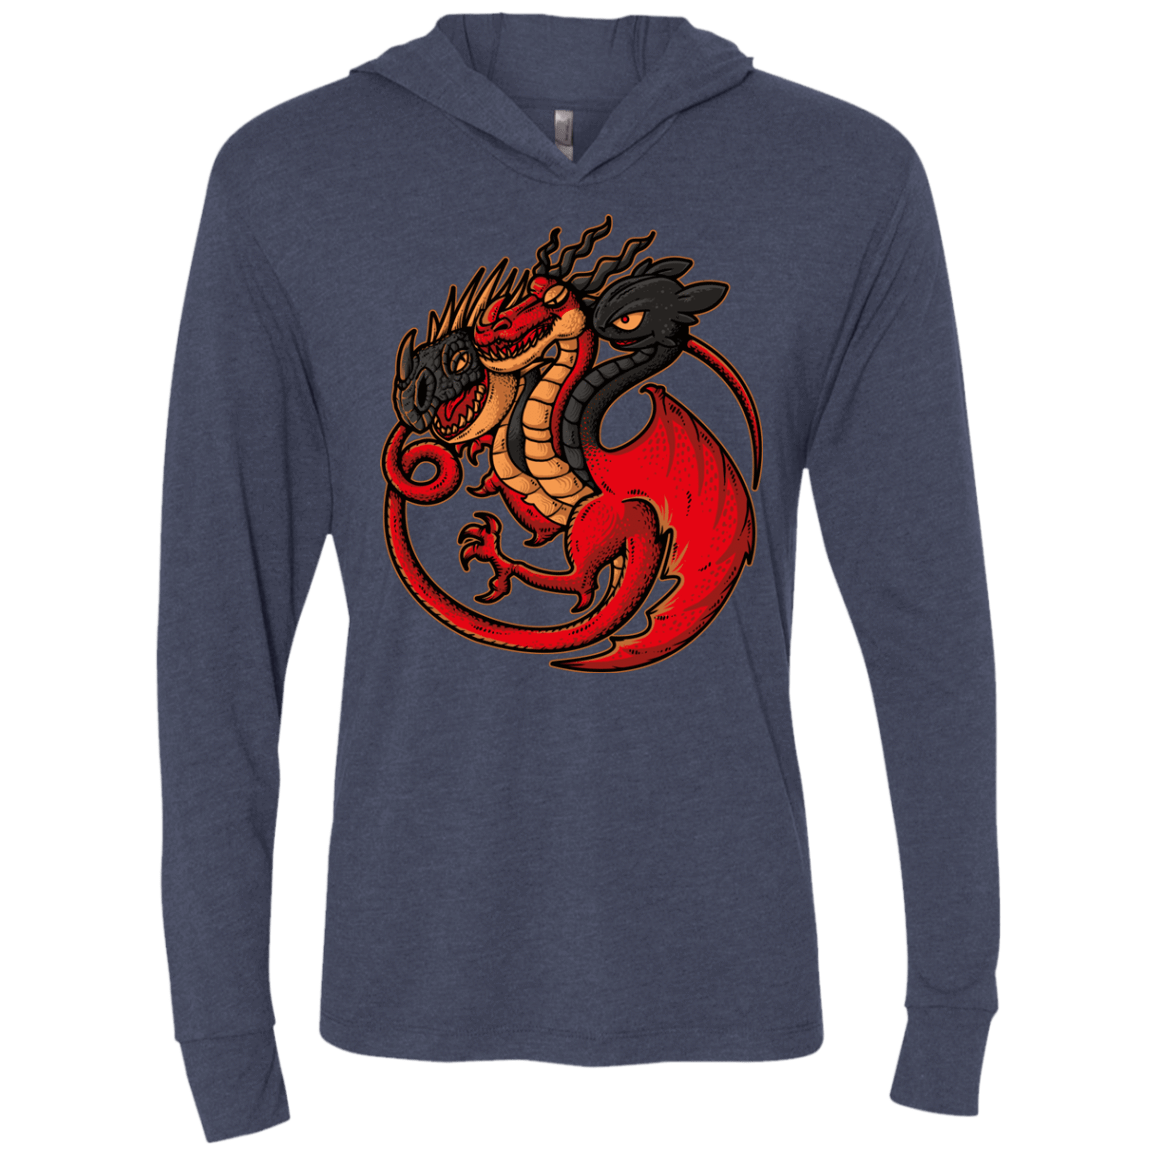 T-Shirts Vintage Navy / X-Small FIRE BLOOD AND TRAINING Triblend Long Sleeve Hoodie Tee